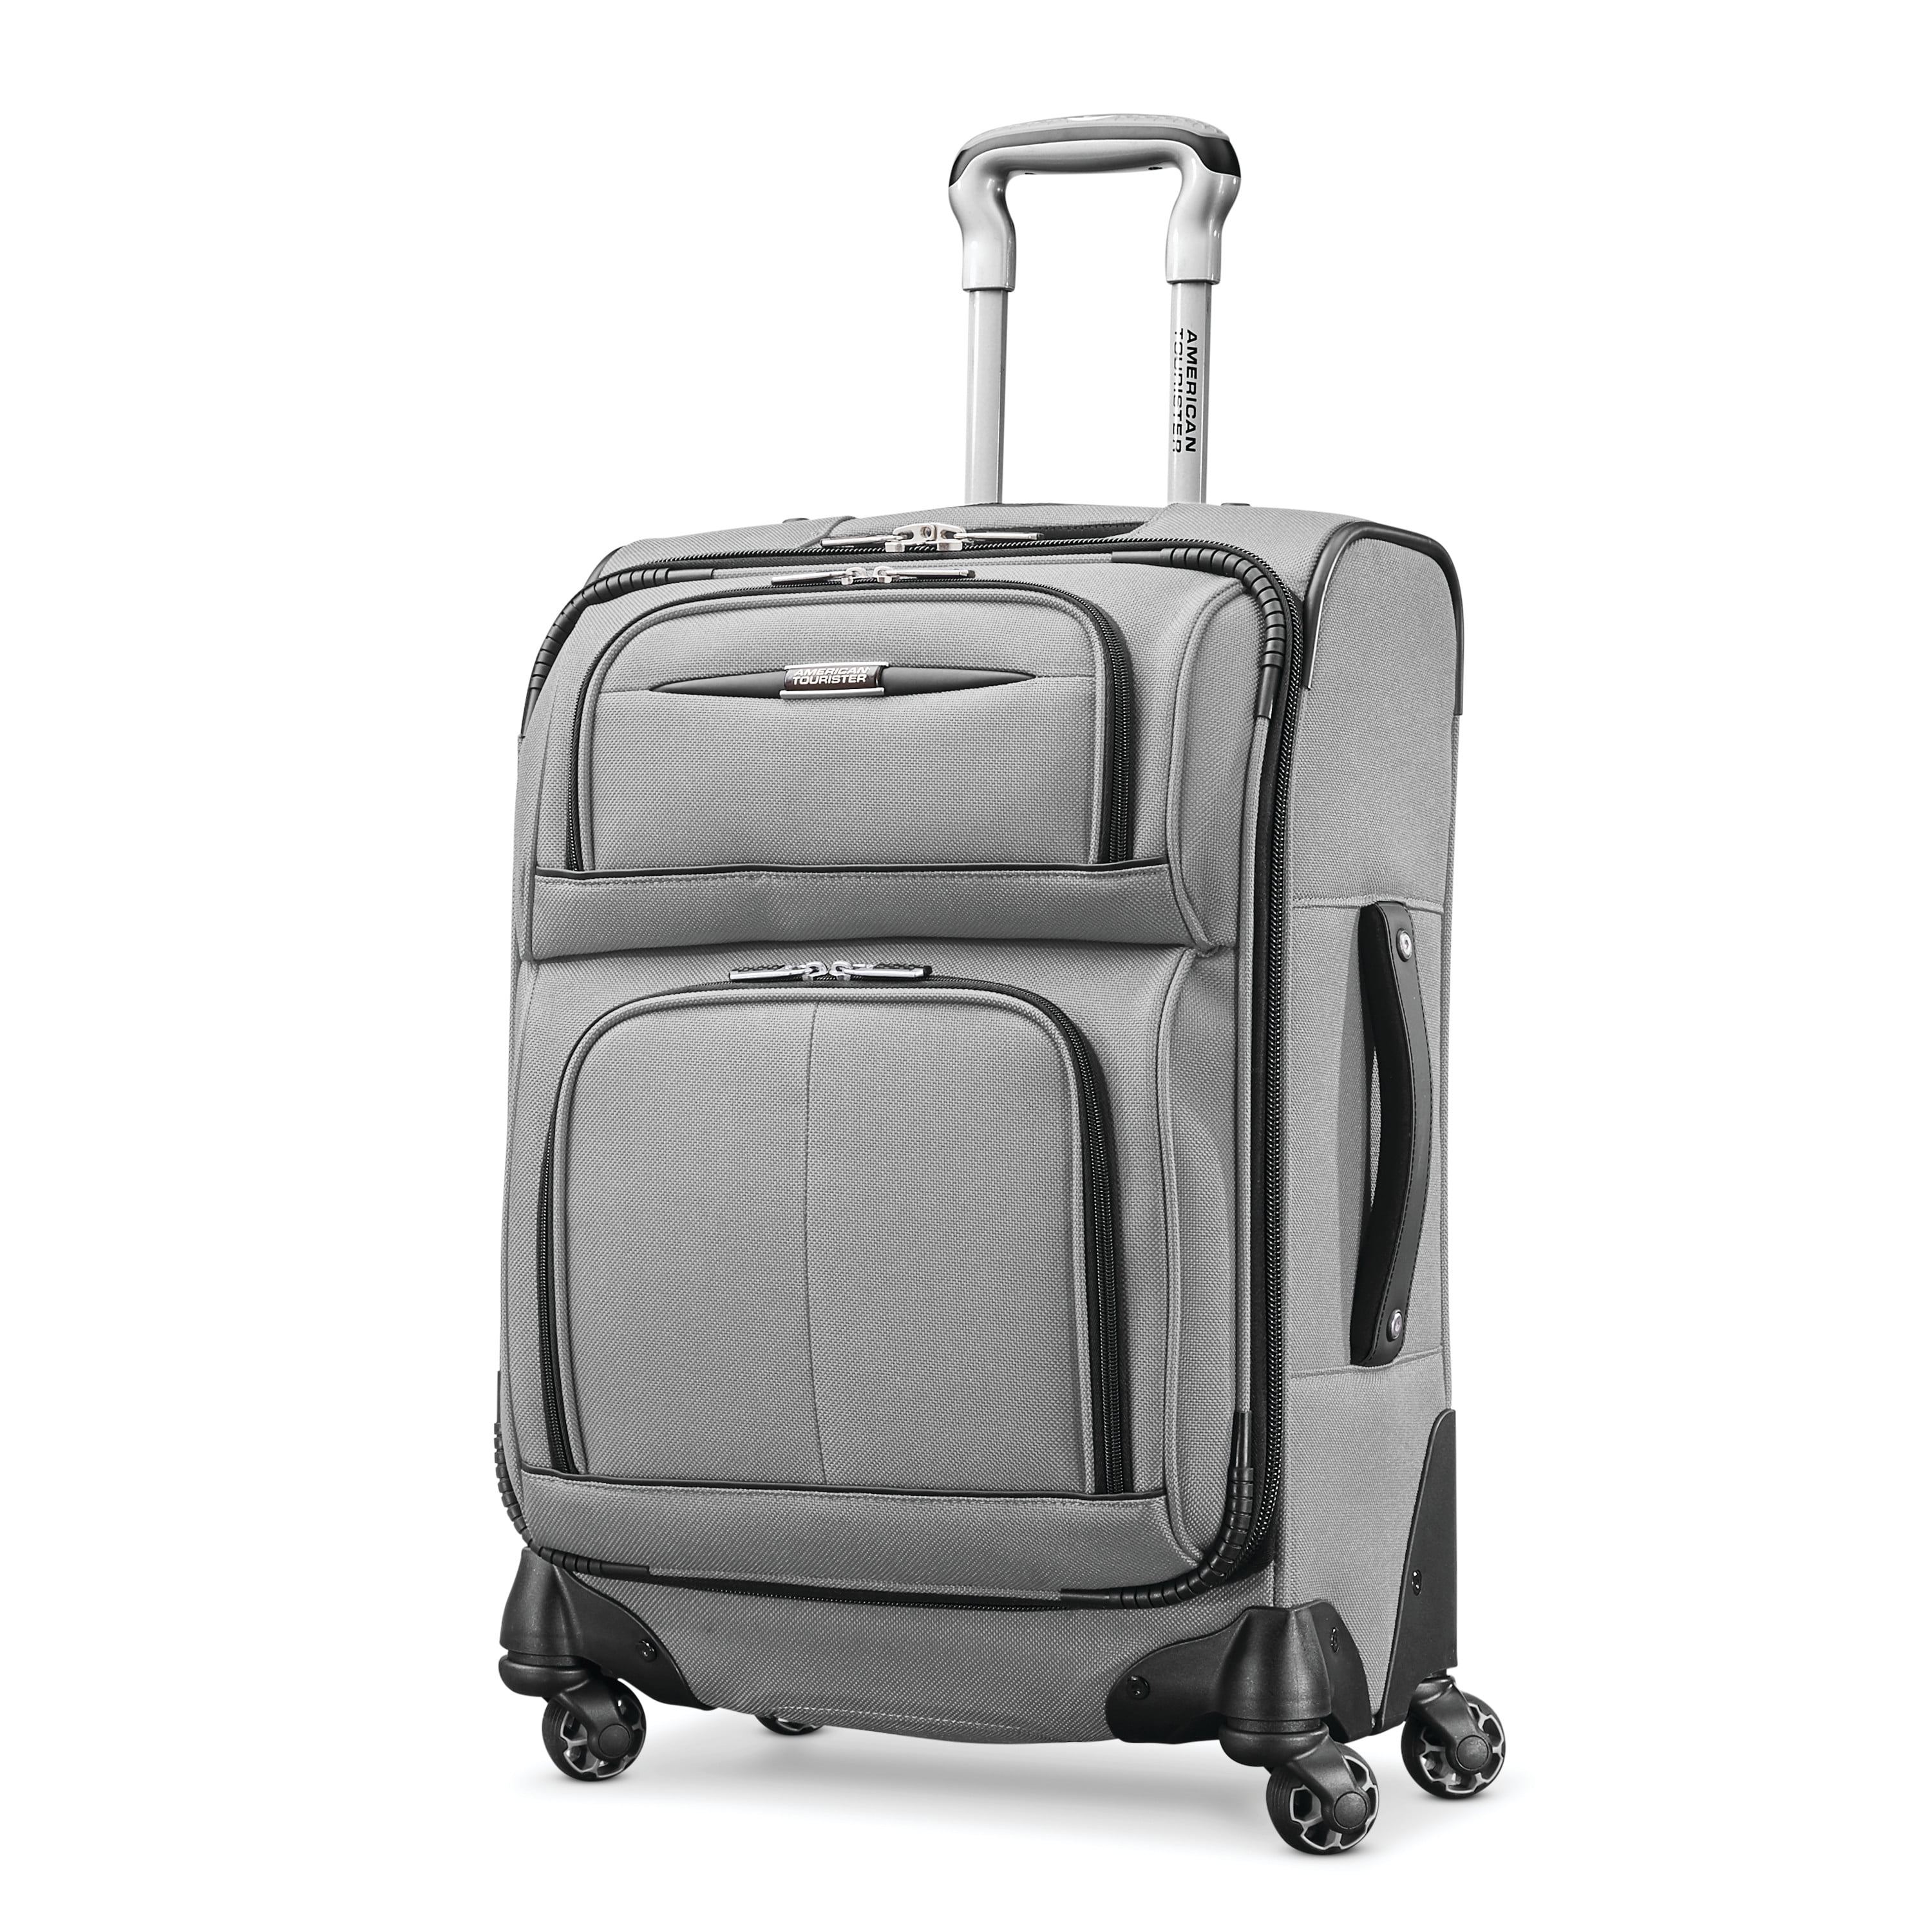 american traveller luggage review